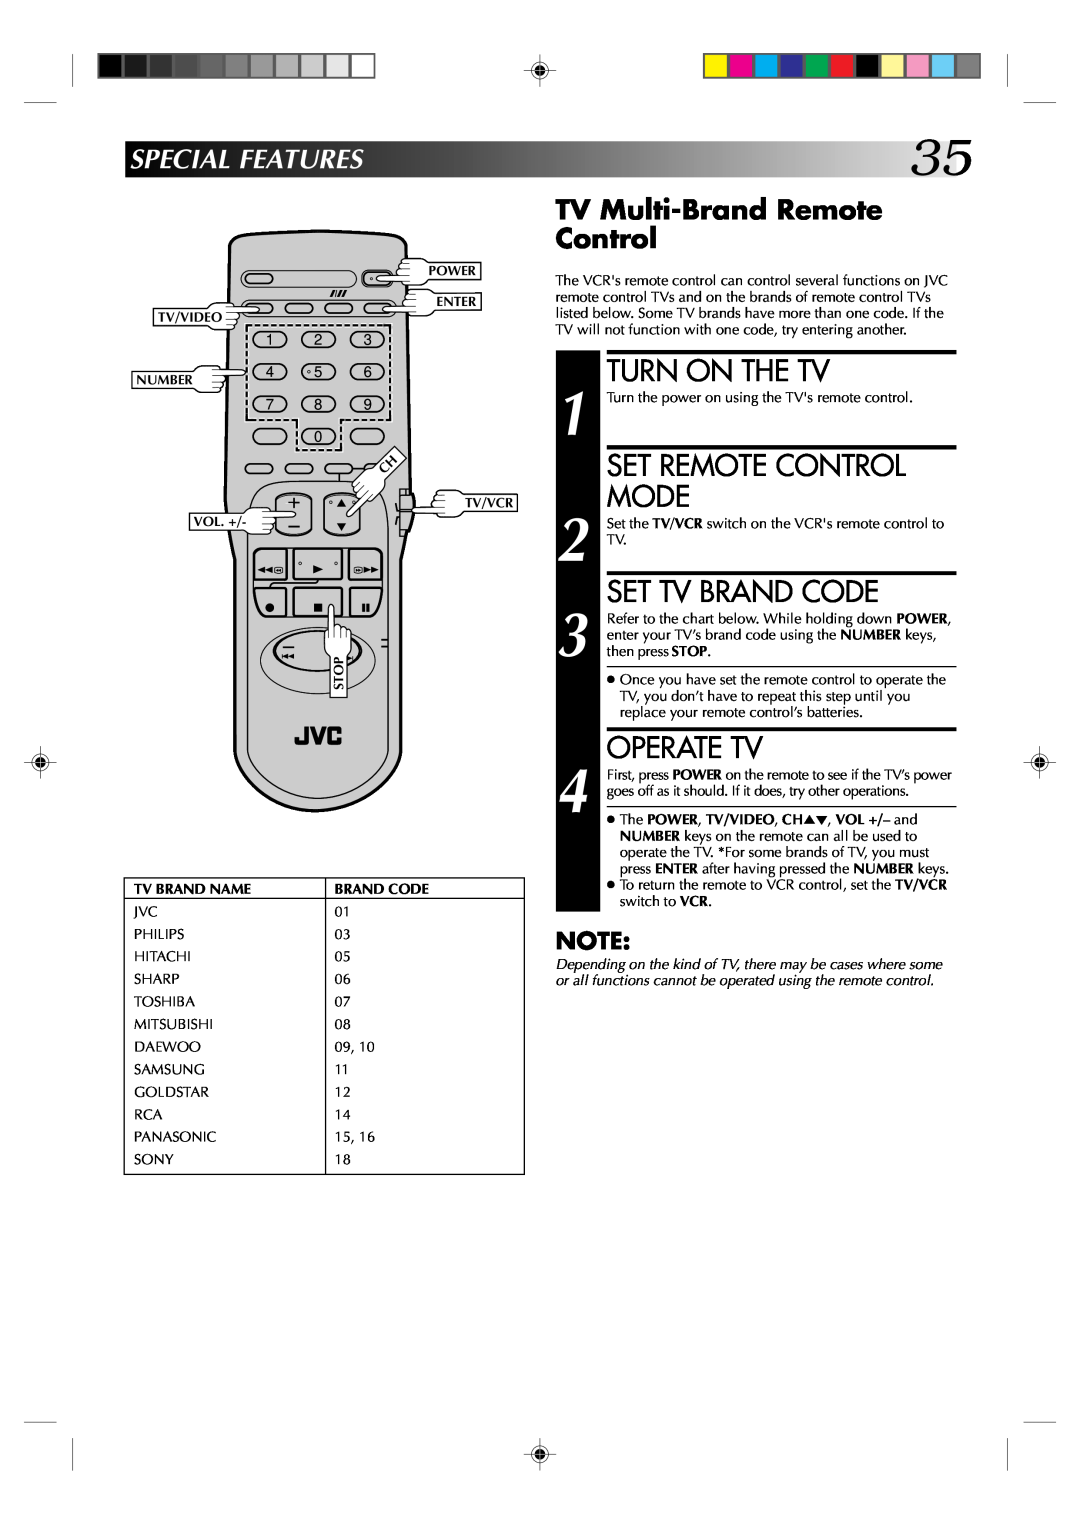 JVC HR-J631T manual Turn On The Tv, Set Remote Control, Mode, Set Tv Brand Code, Operate Tv, Specialfeatures, Tv Brand Name 